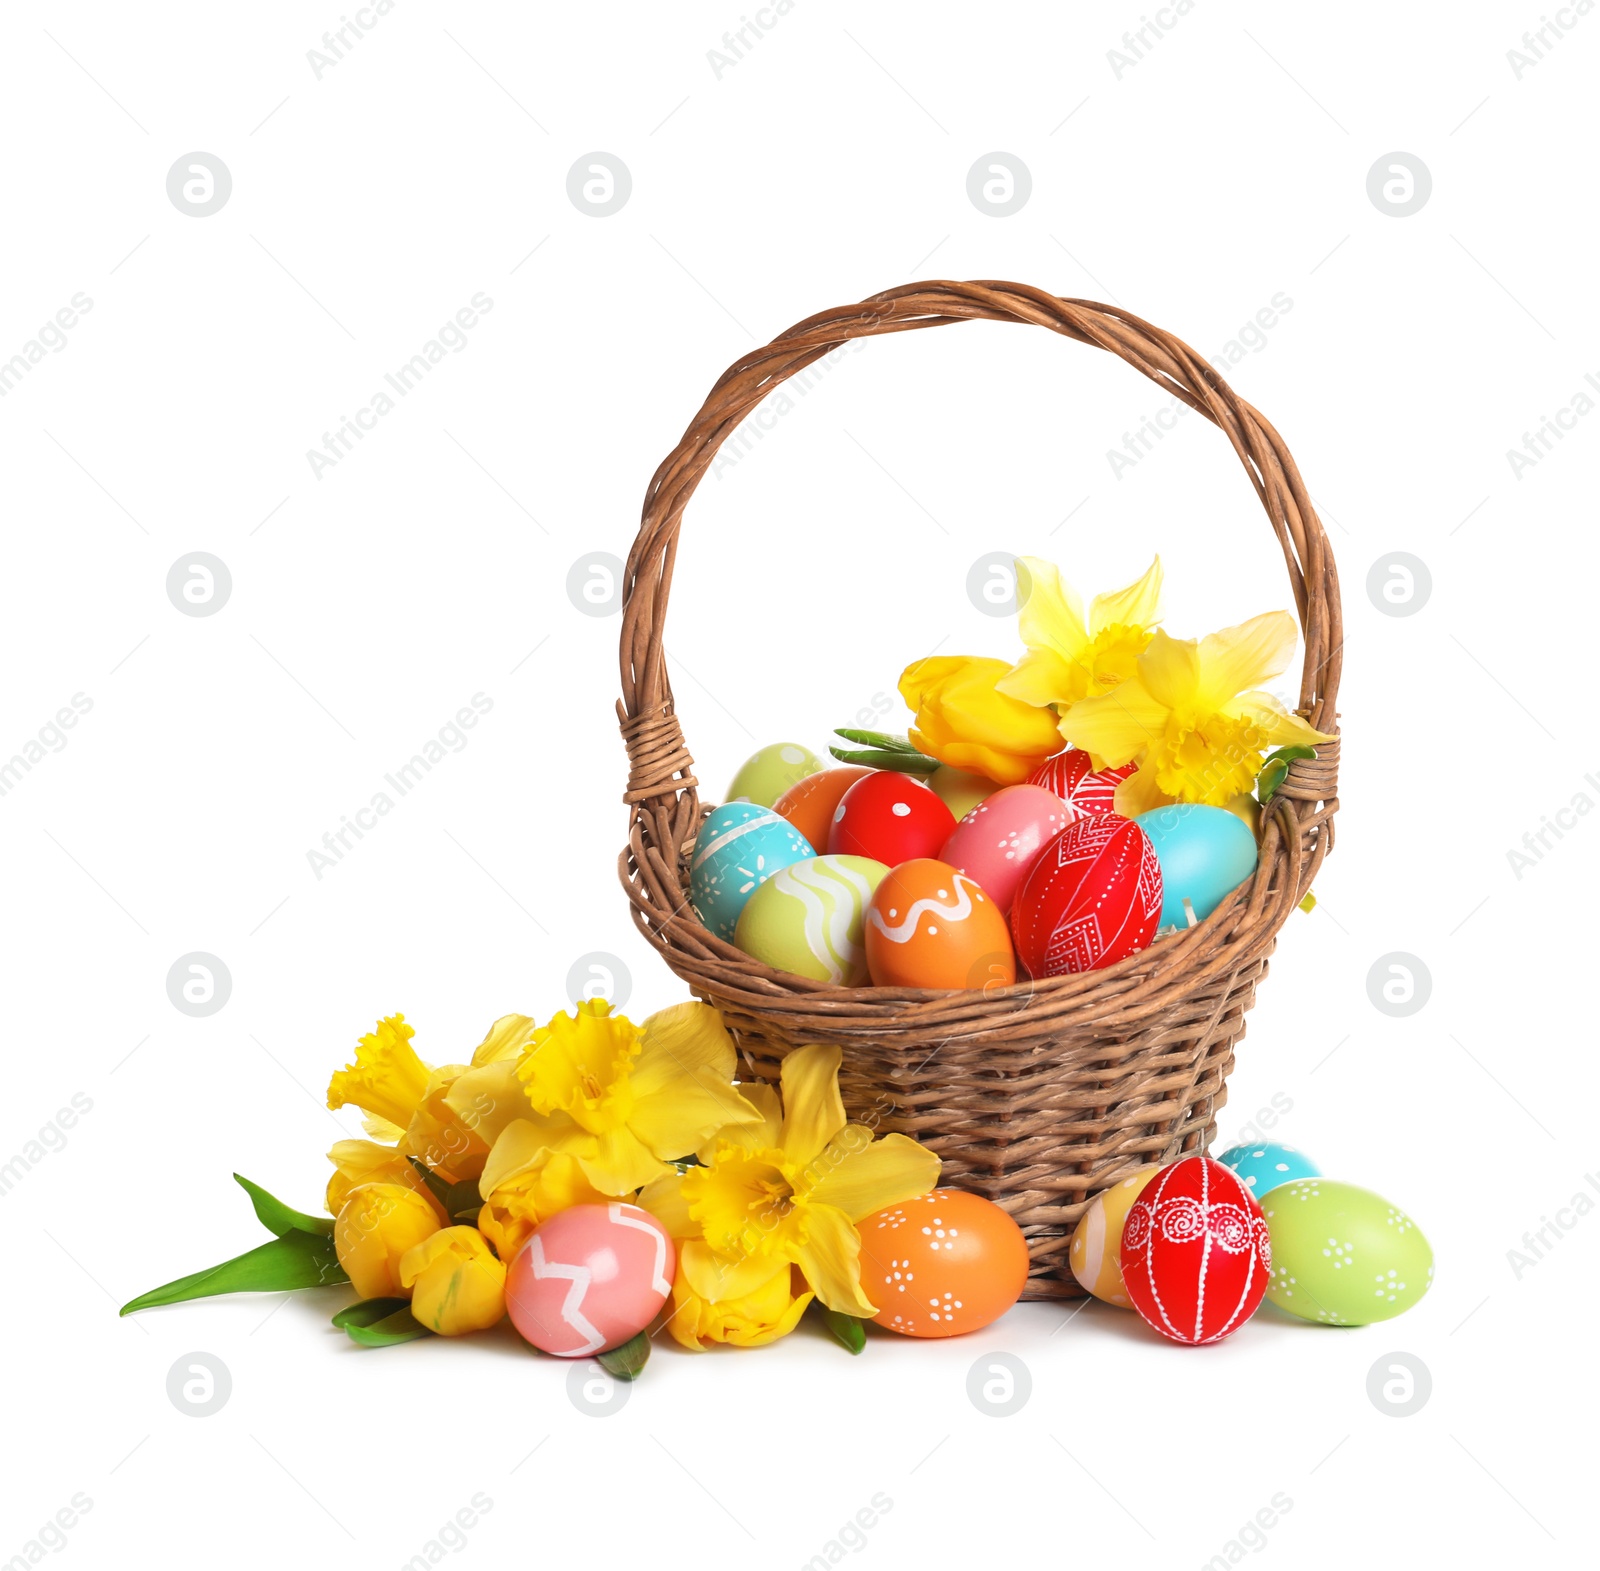 Photo of Wicker basket with painted Easter eggs and flowers on white background